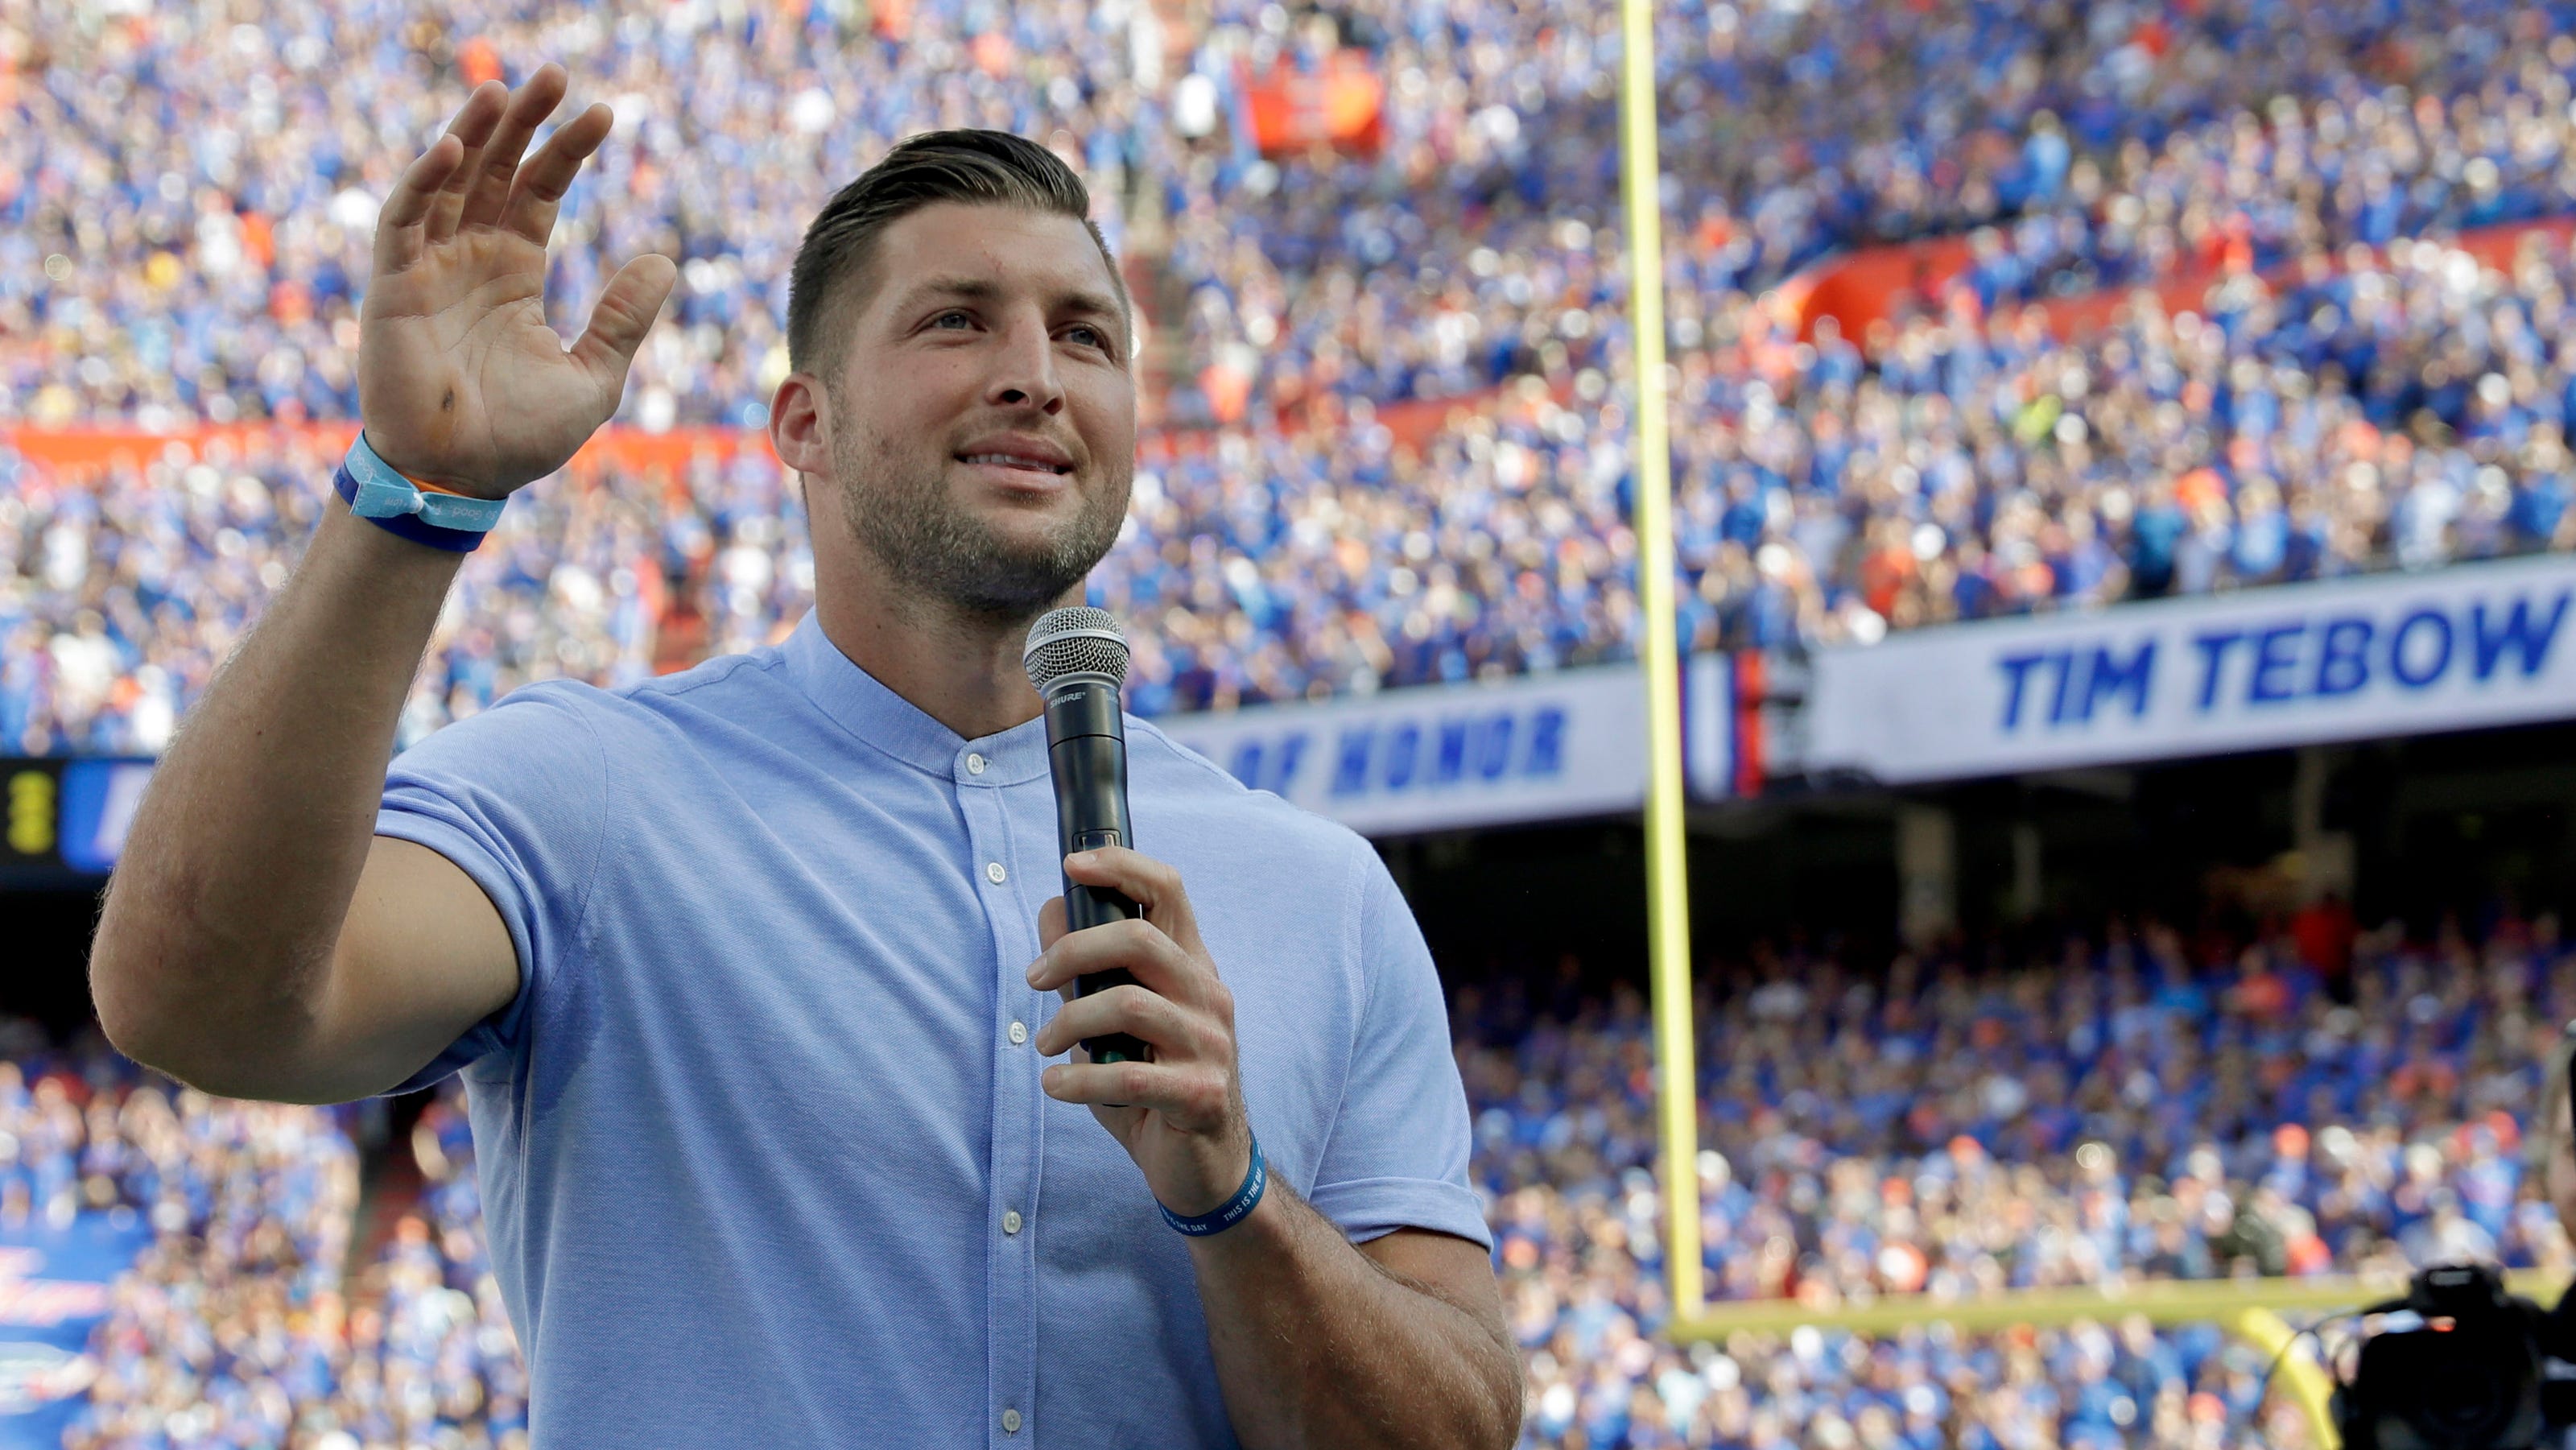 Tim Tebow returns to NFL, signs contract with Jacksonville Jaguars